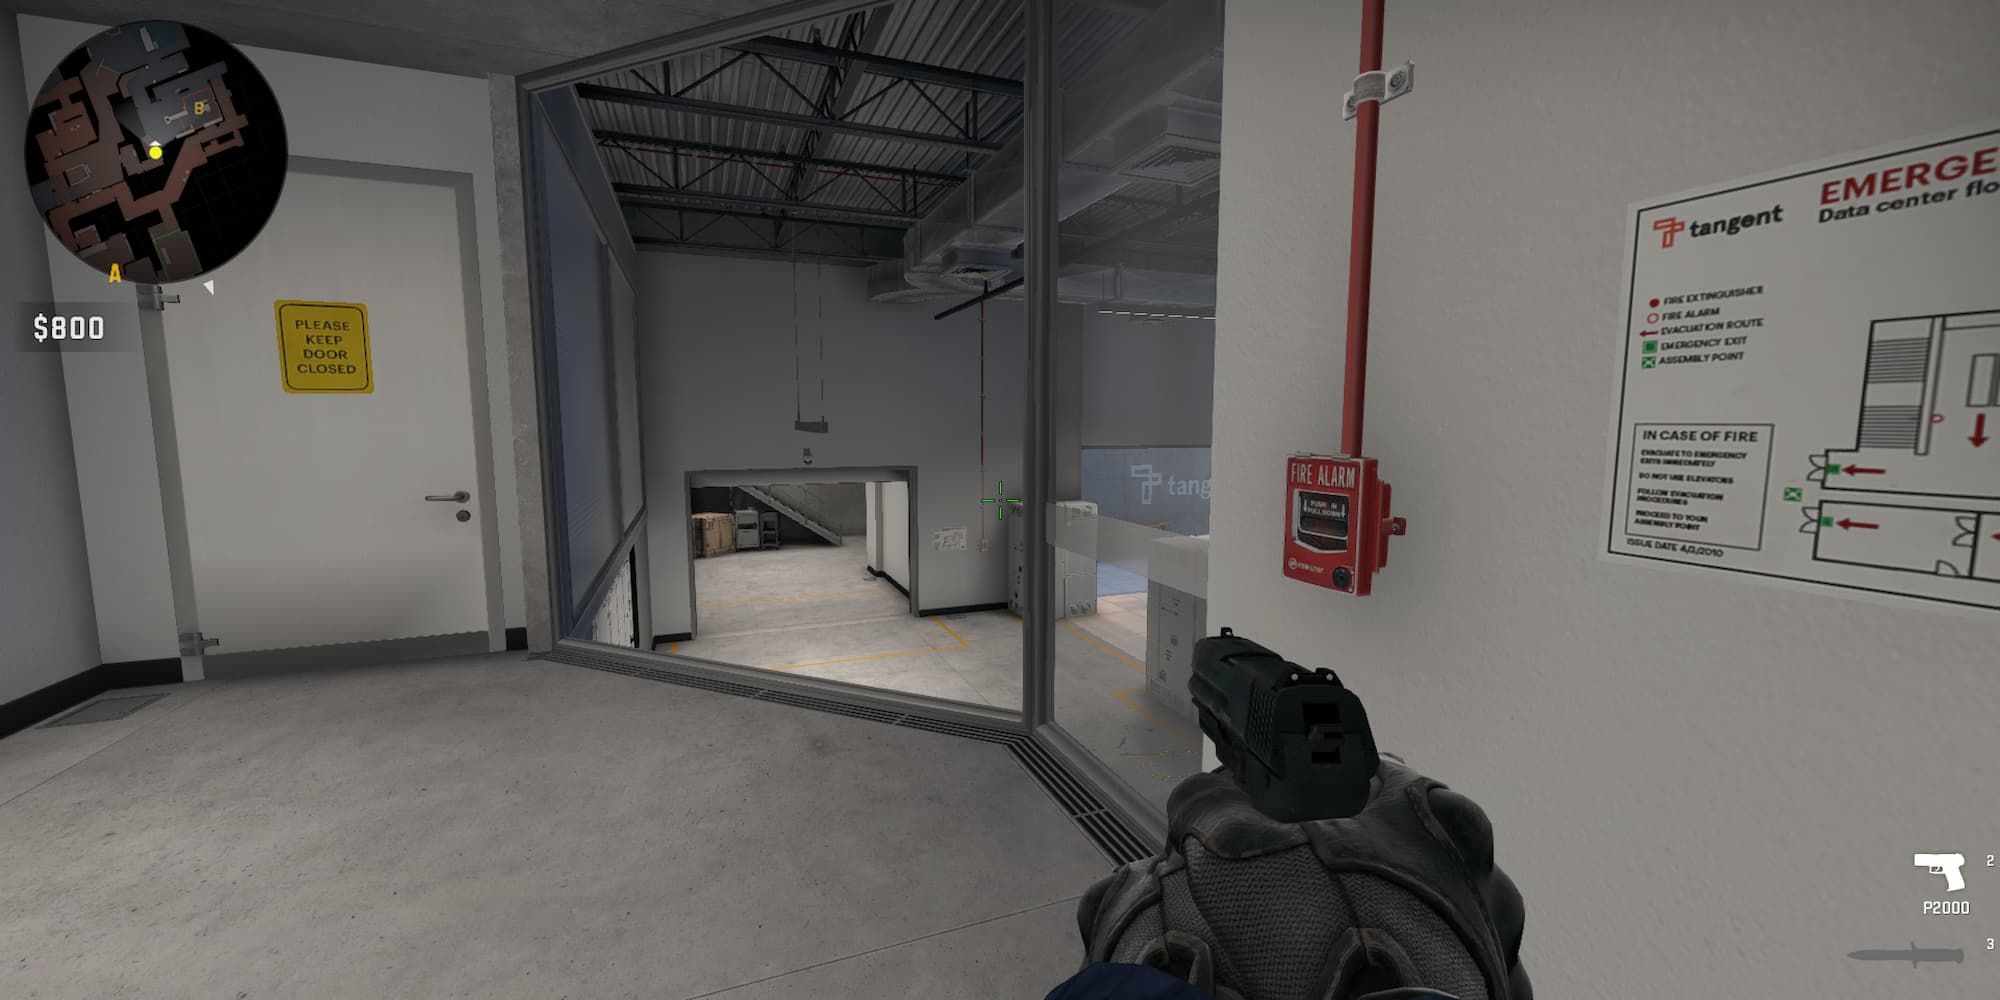 The player looks through the broken glass window at Security Doors on Breach.